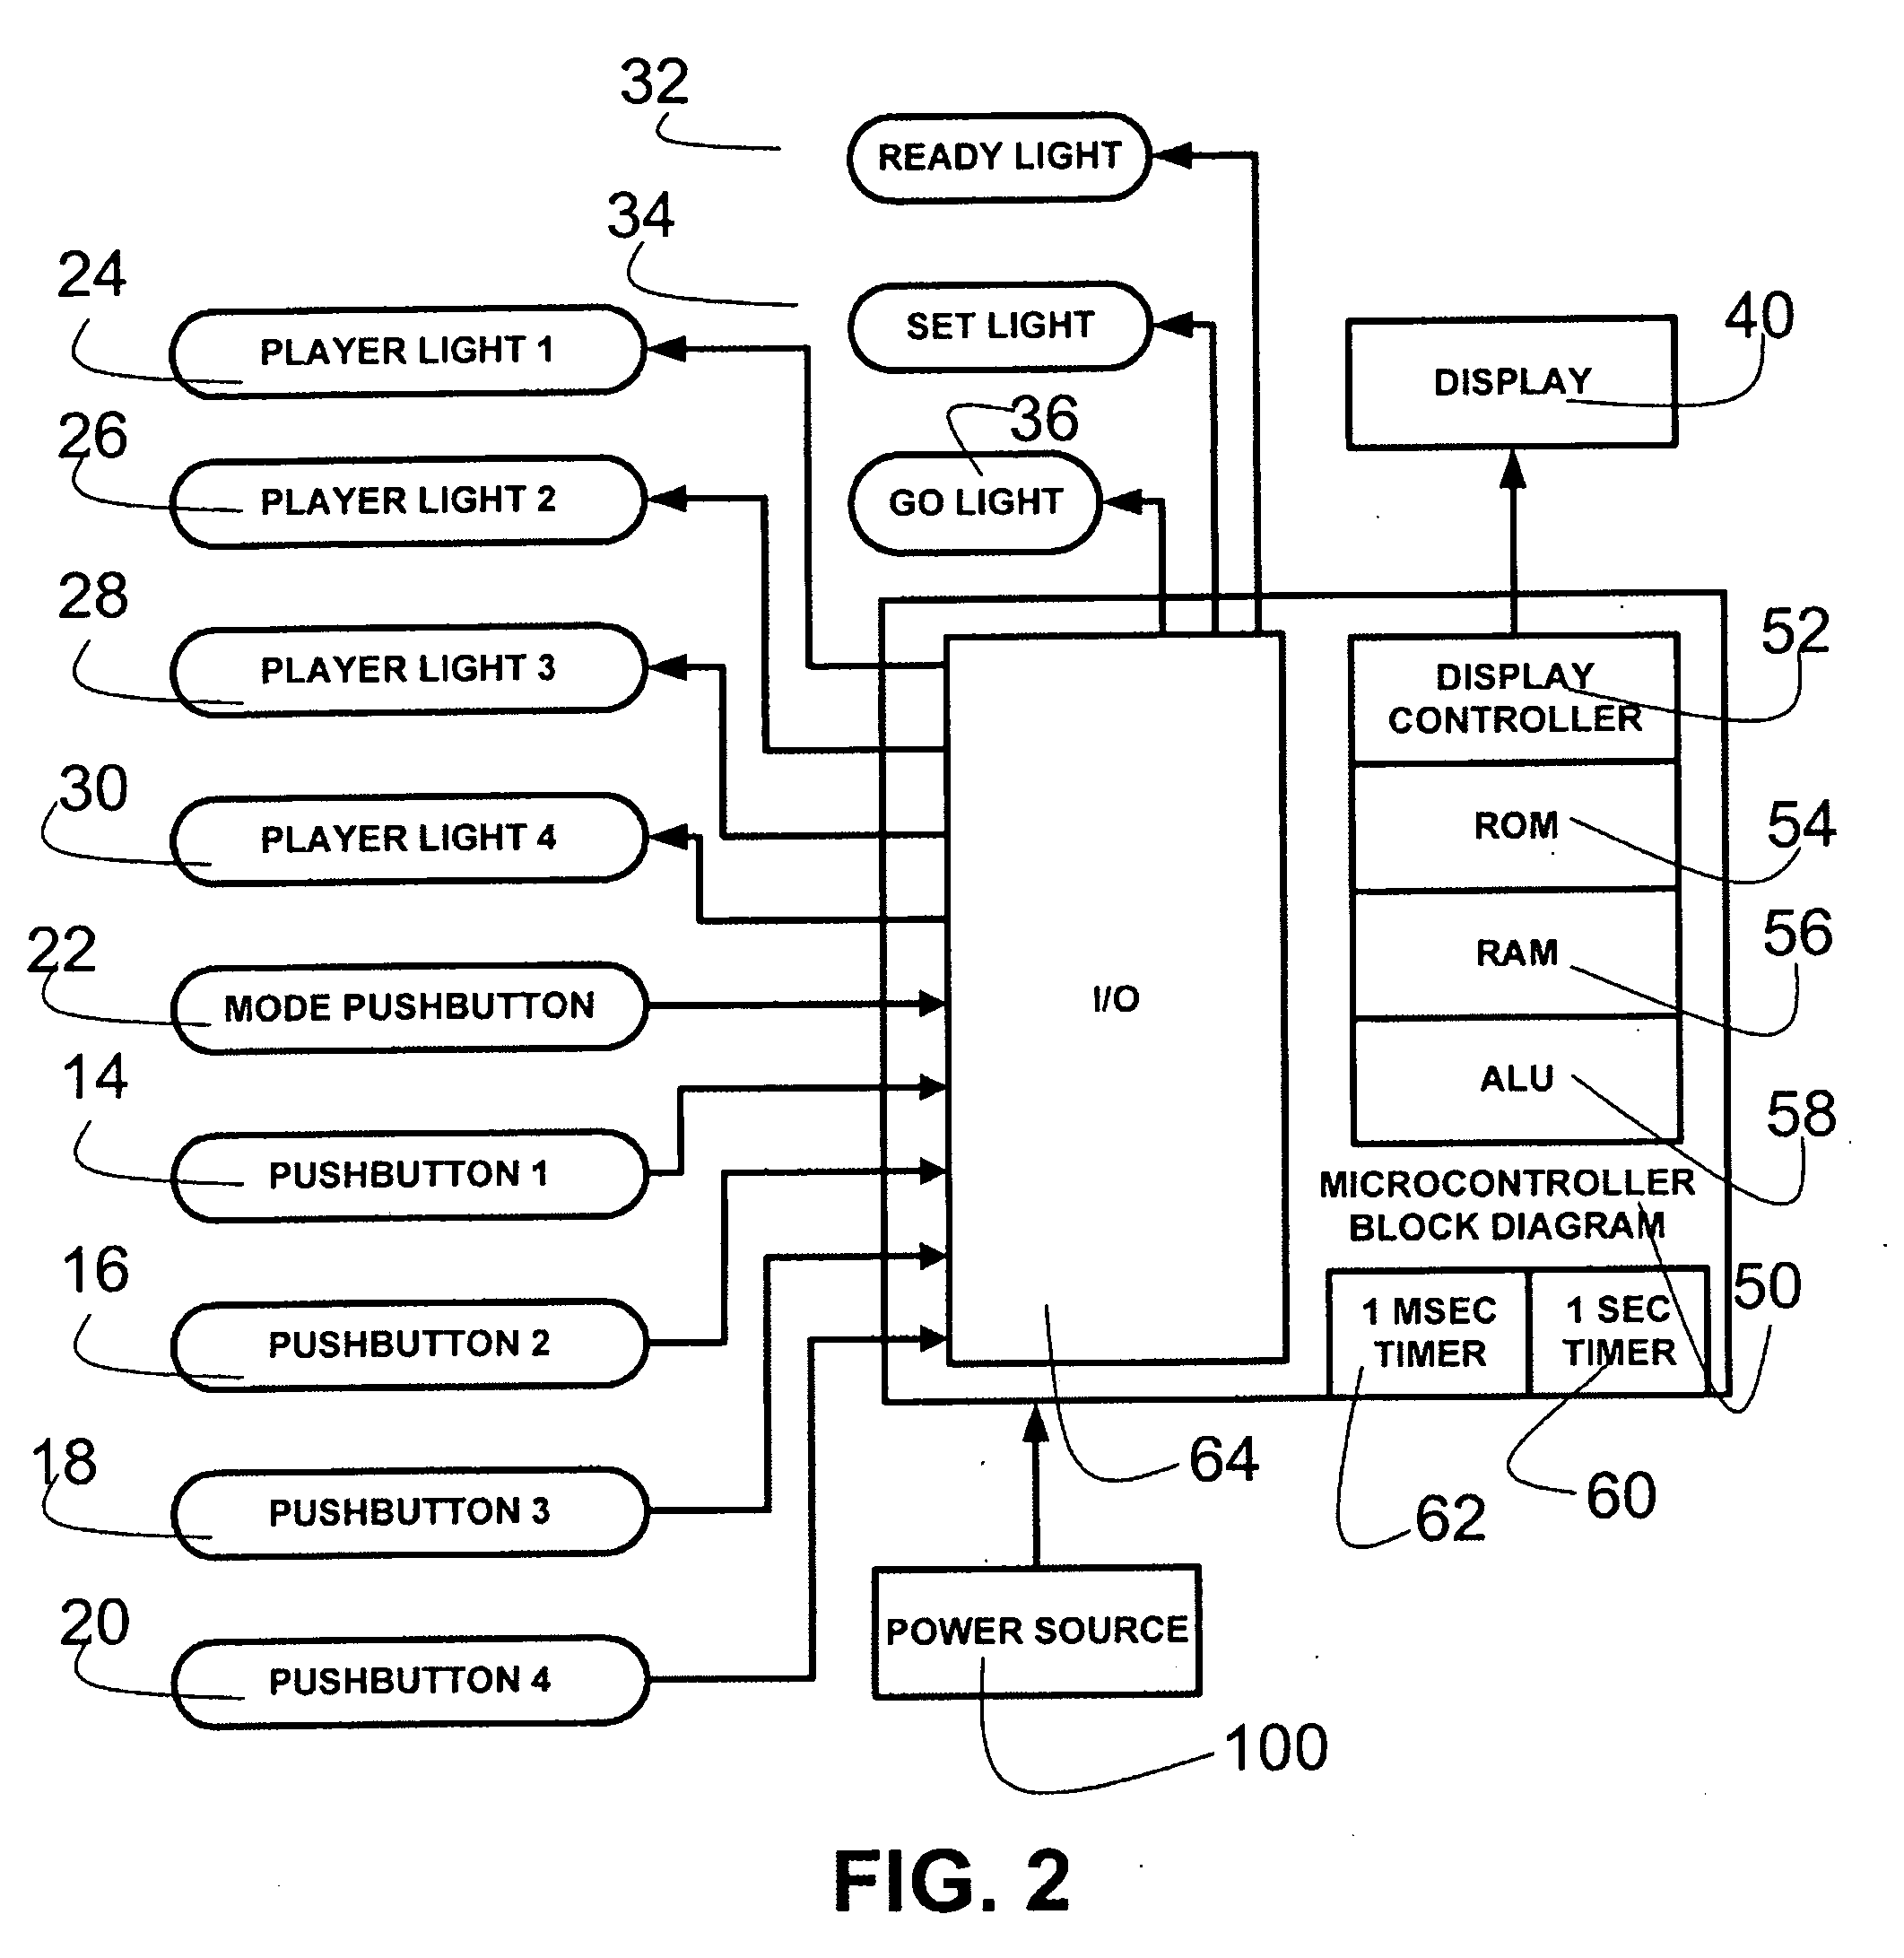 Multi-player reaction time game systems and methods